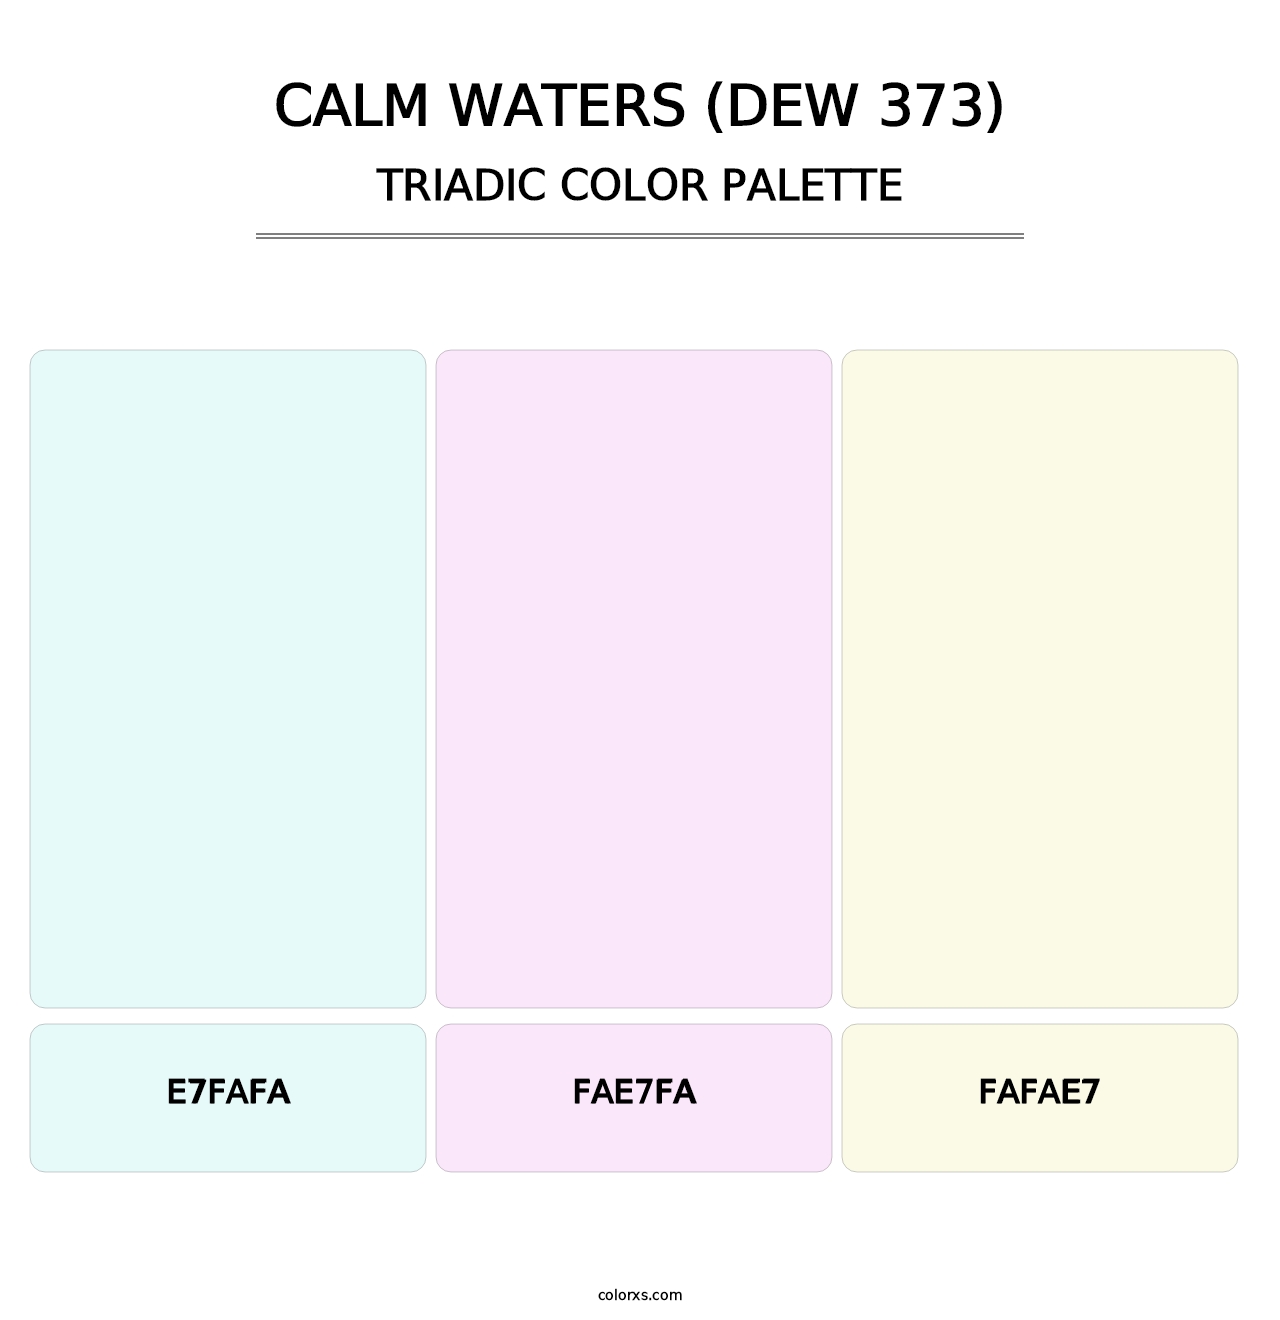 Calm Waters (DEW 373) - Triadic Color Palette